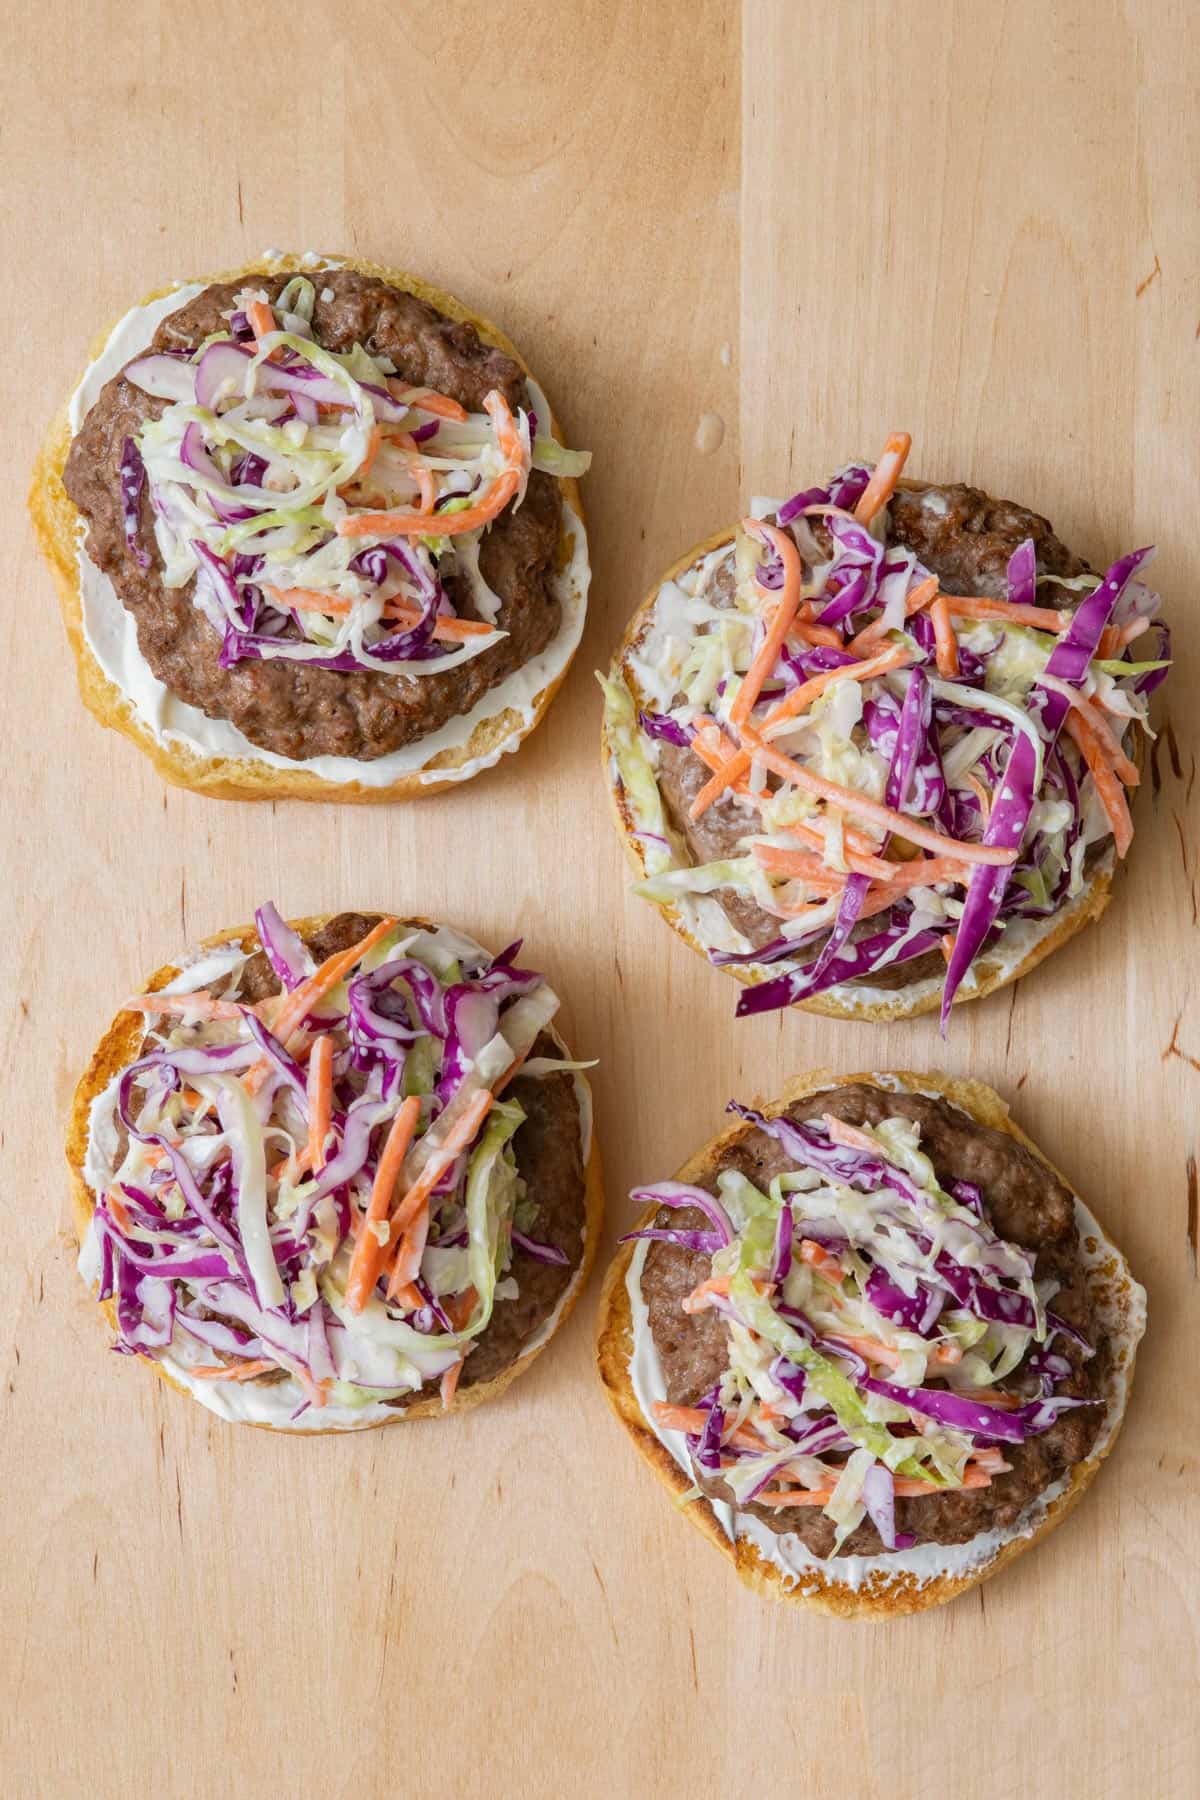 Top down view of four open faced burgers topped with coleslaw.